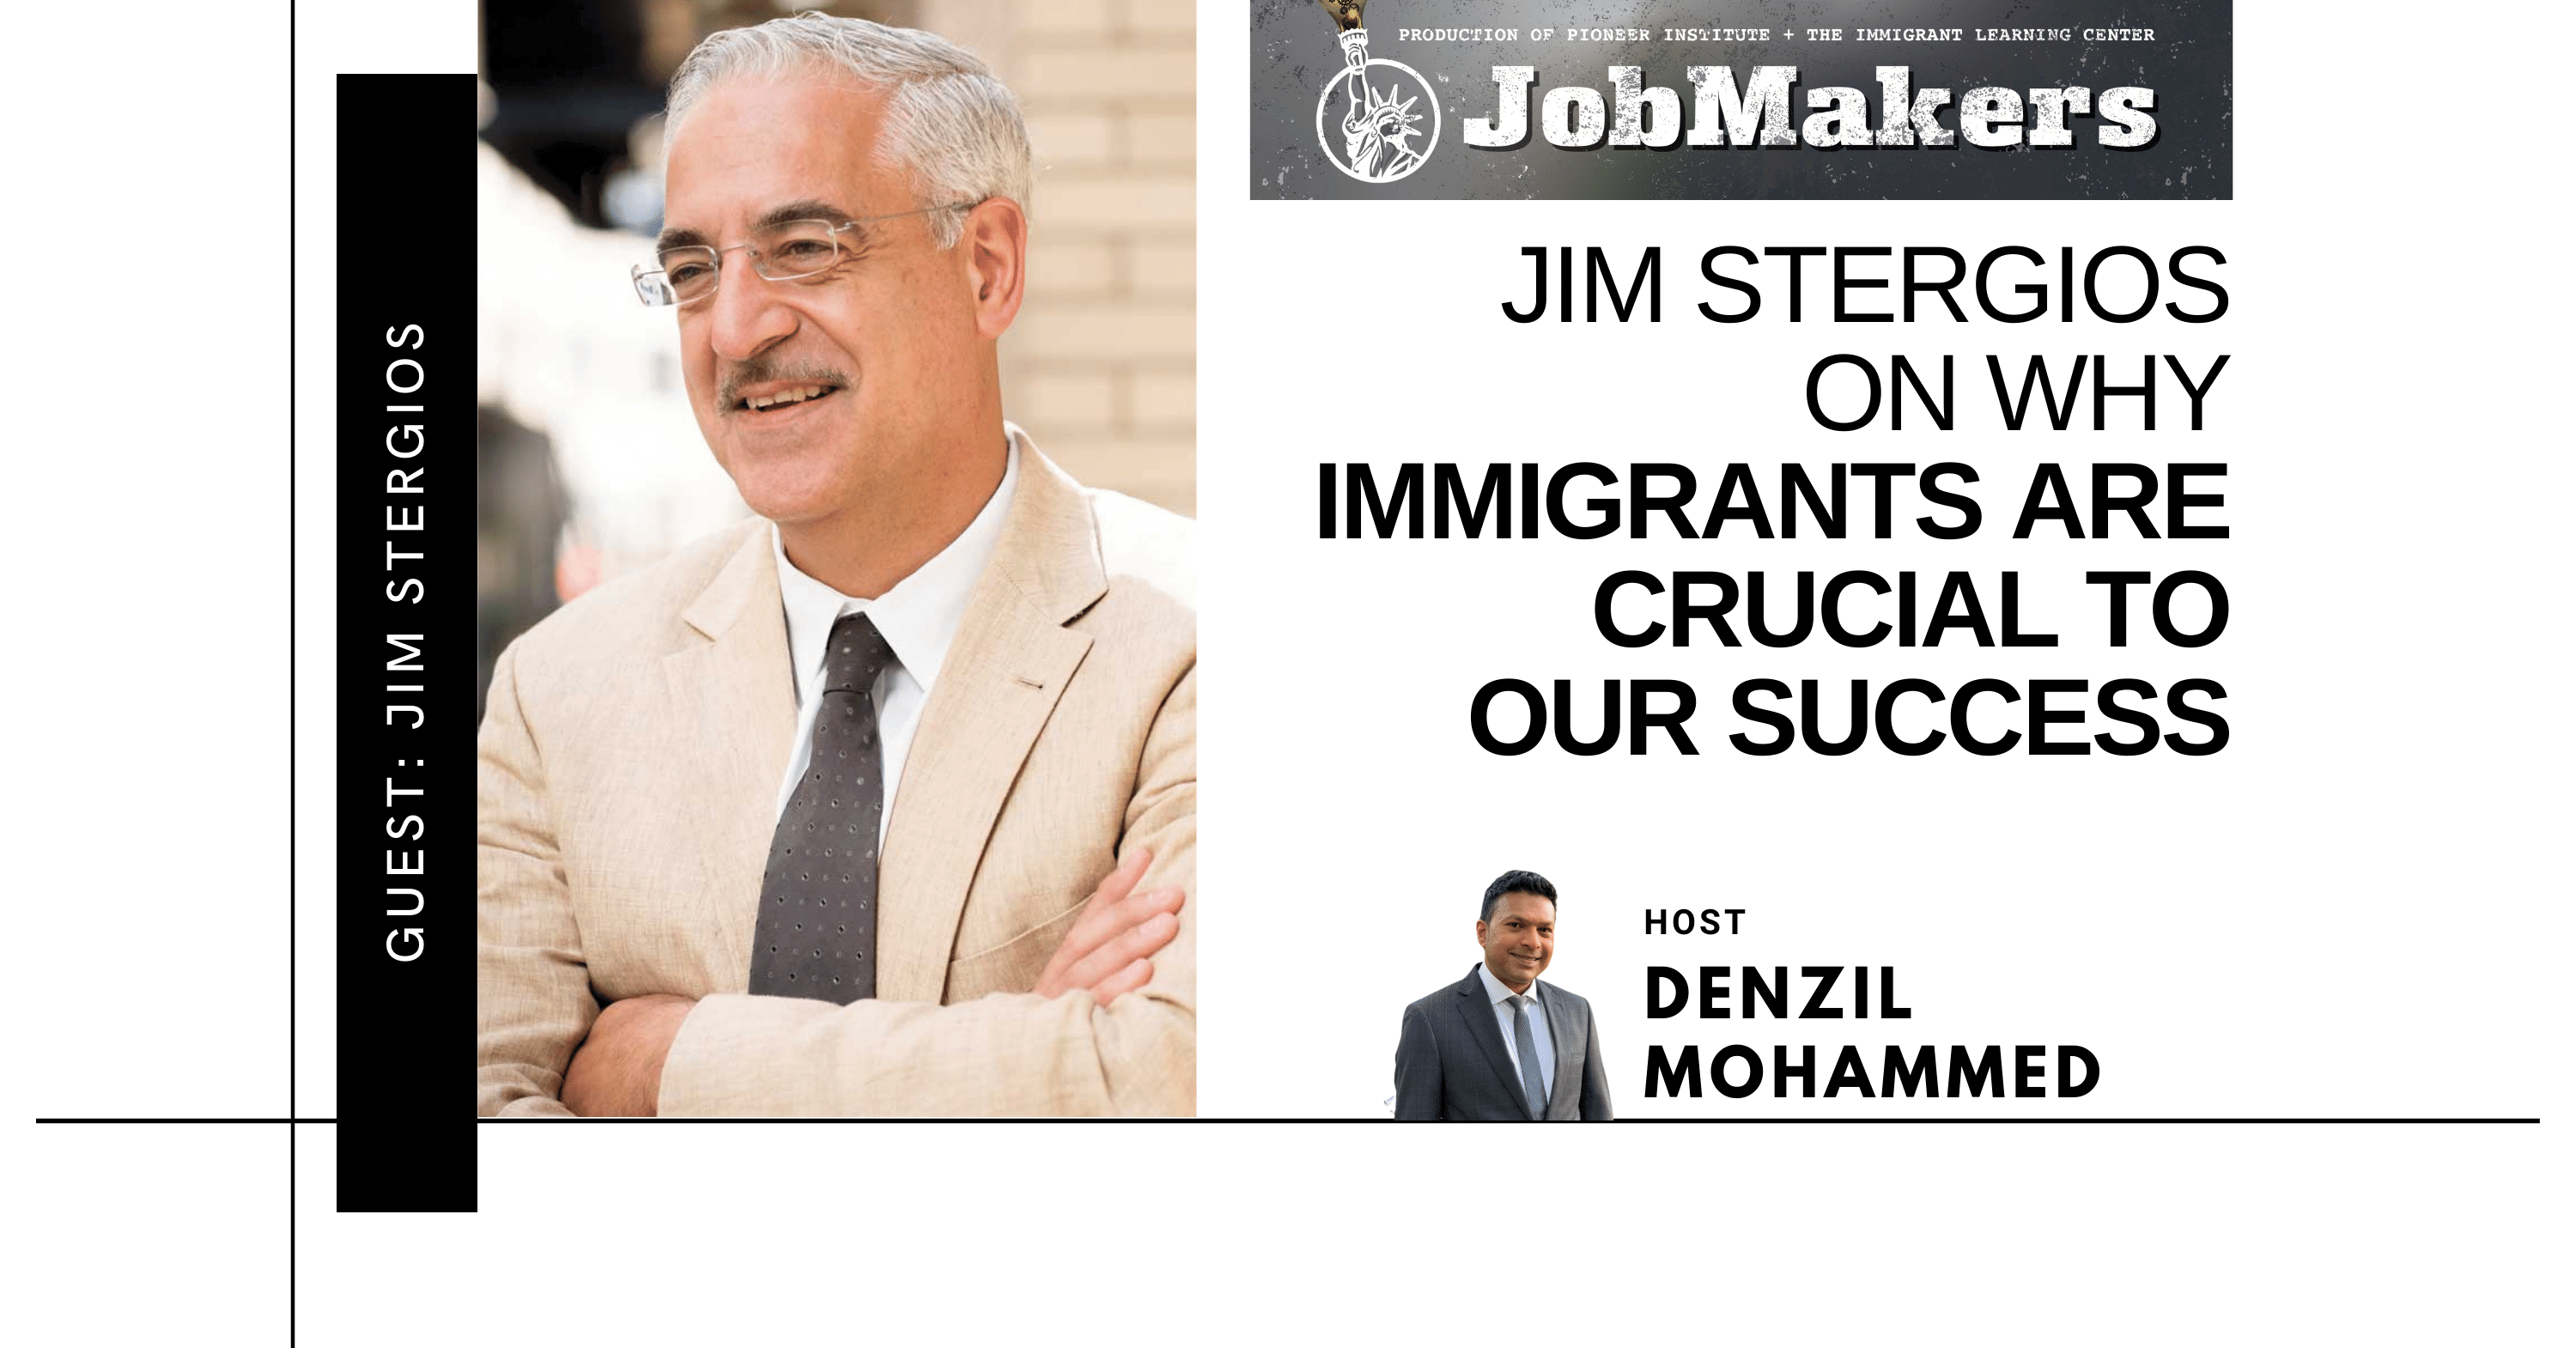 Jim Stergios on Why Immigrants Are Crucial to Our Success